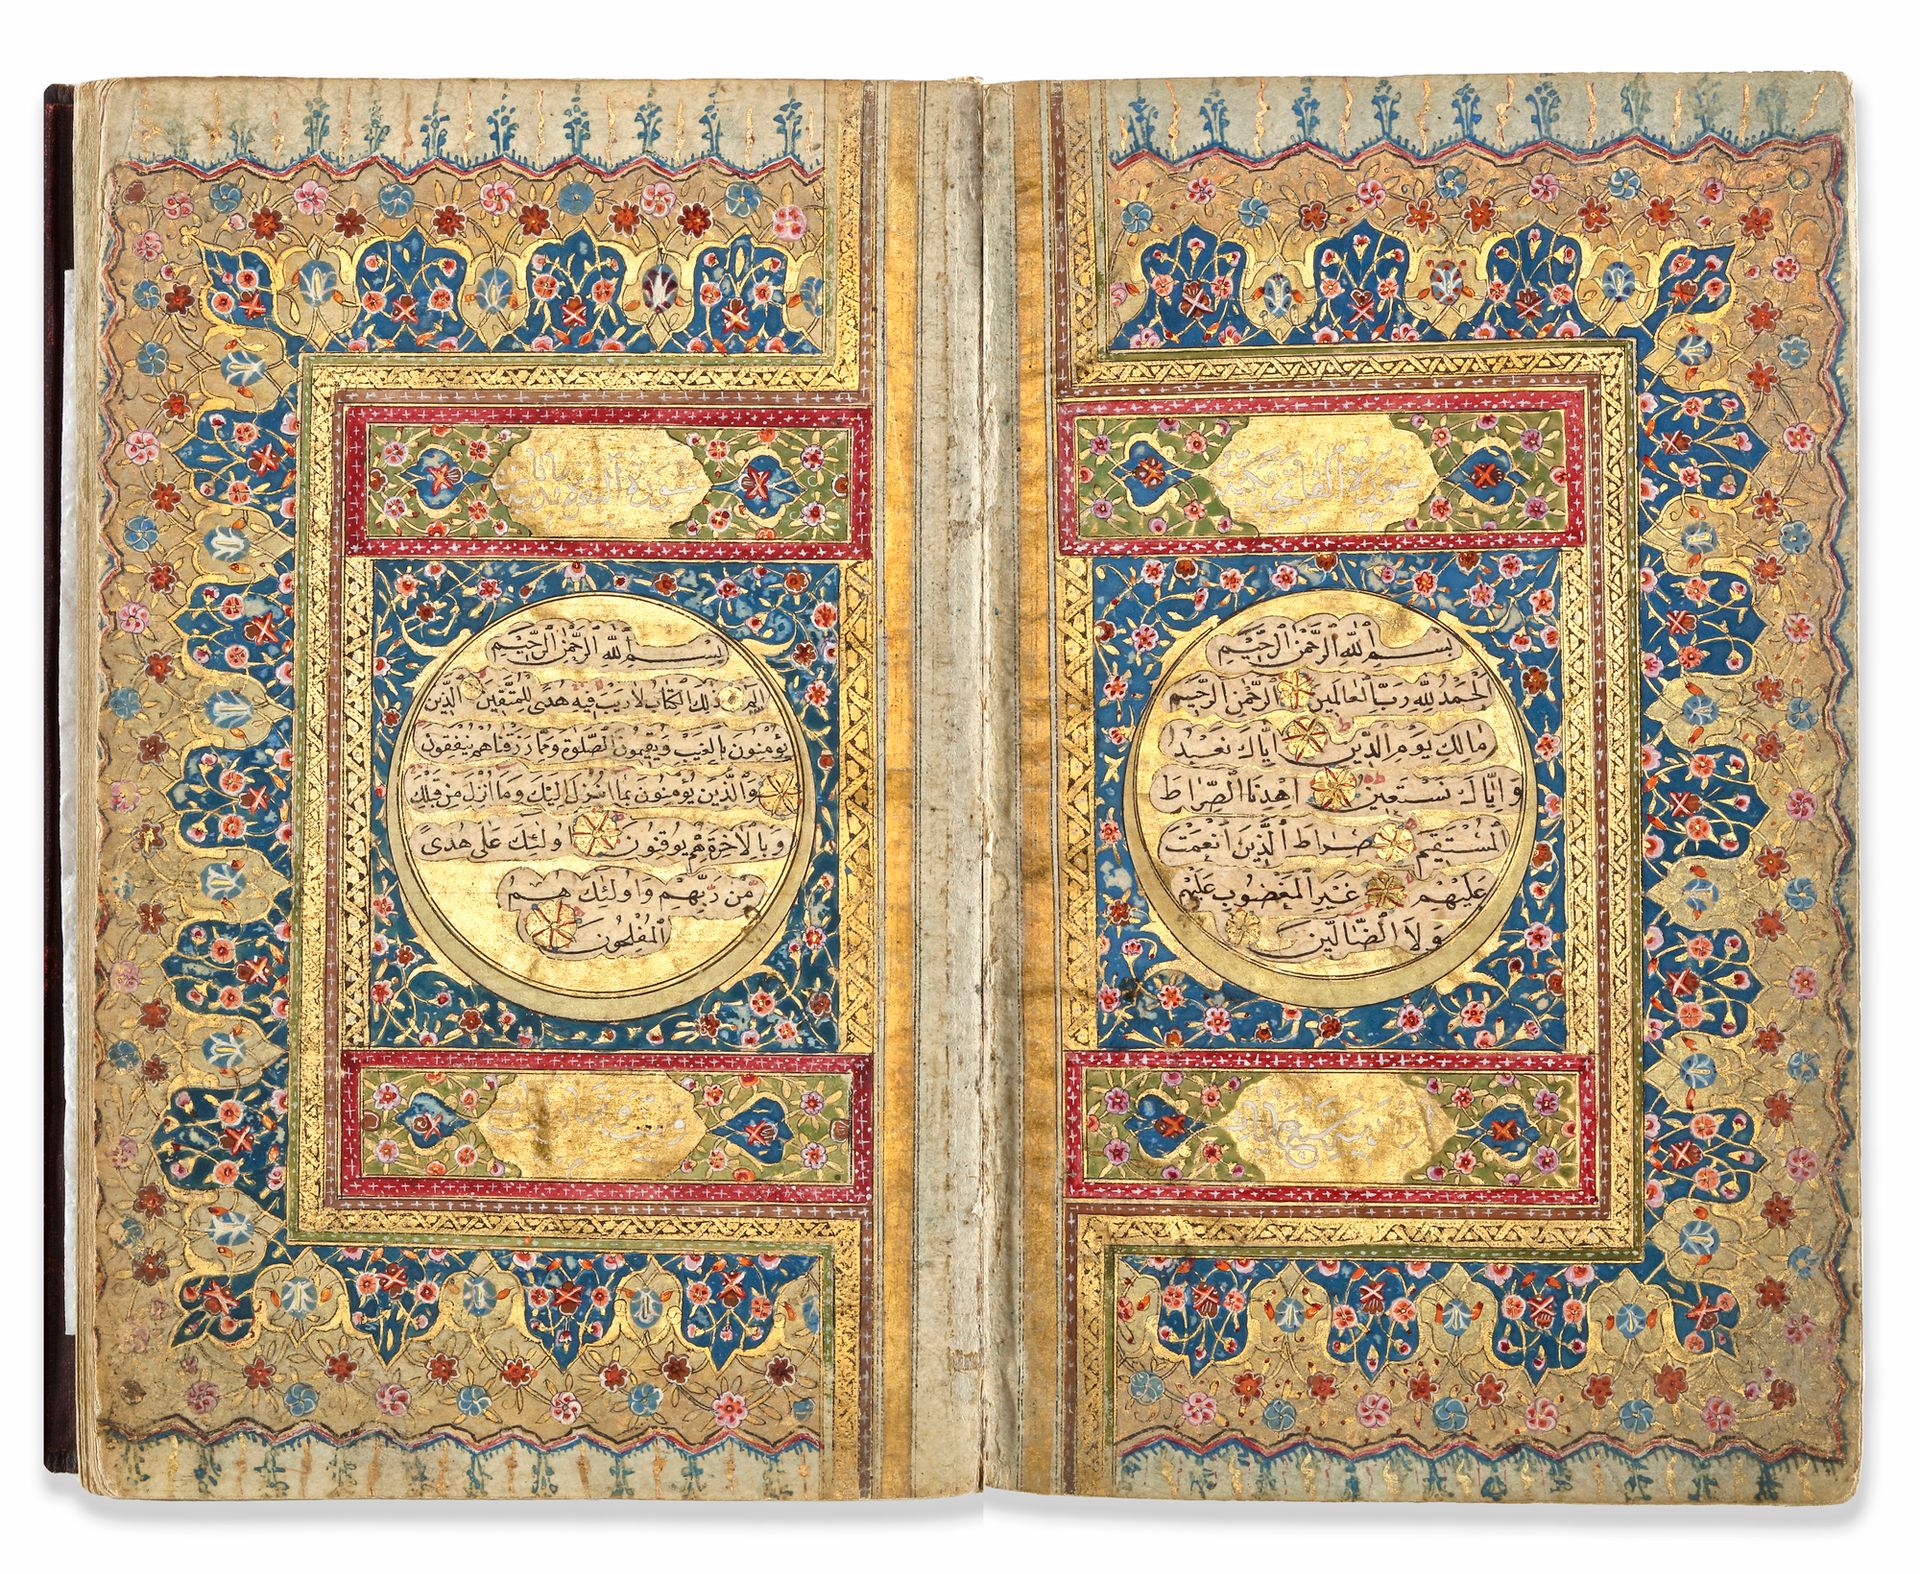 AN OTTOMAN QURAN SIGNED BY SULEIMAN AL-QAE'I AND DATED 1191 AH/1777 AD Un Coran &hellip;